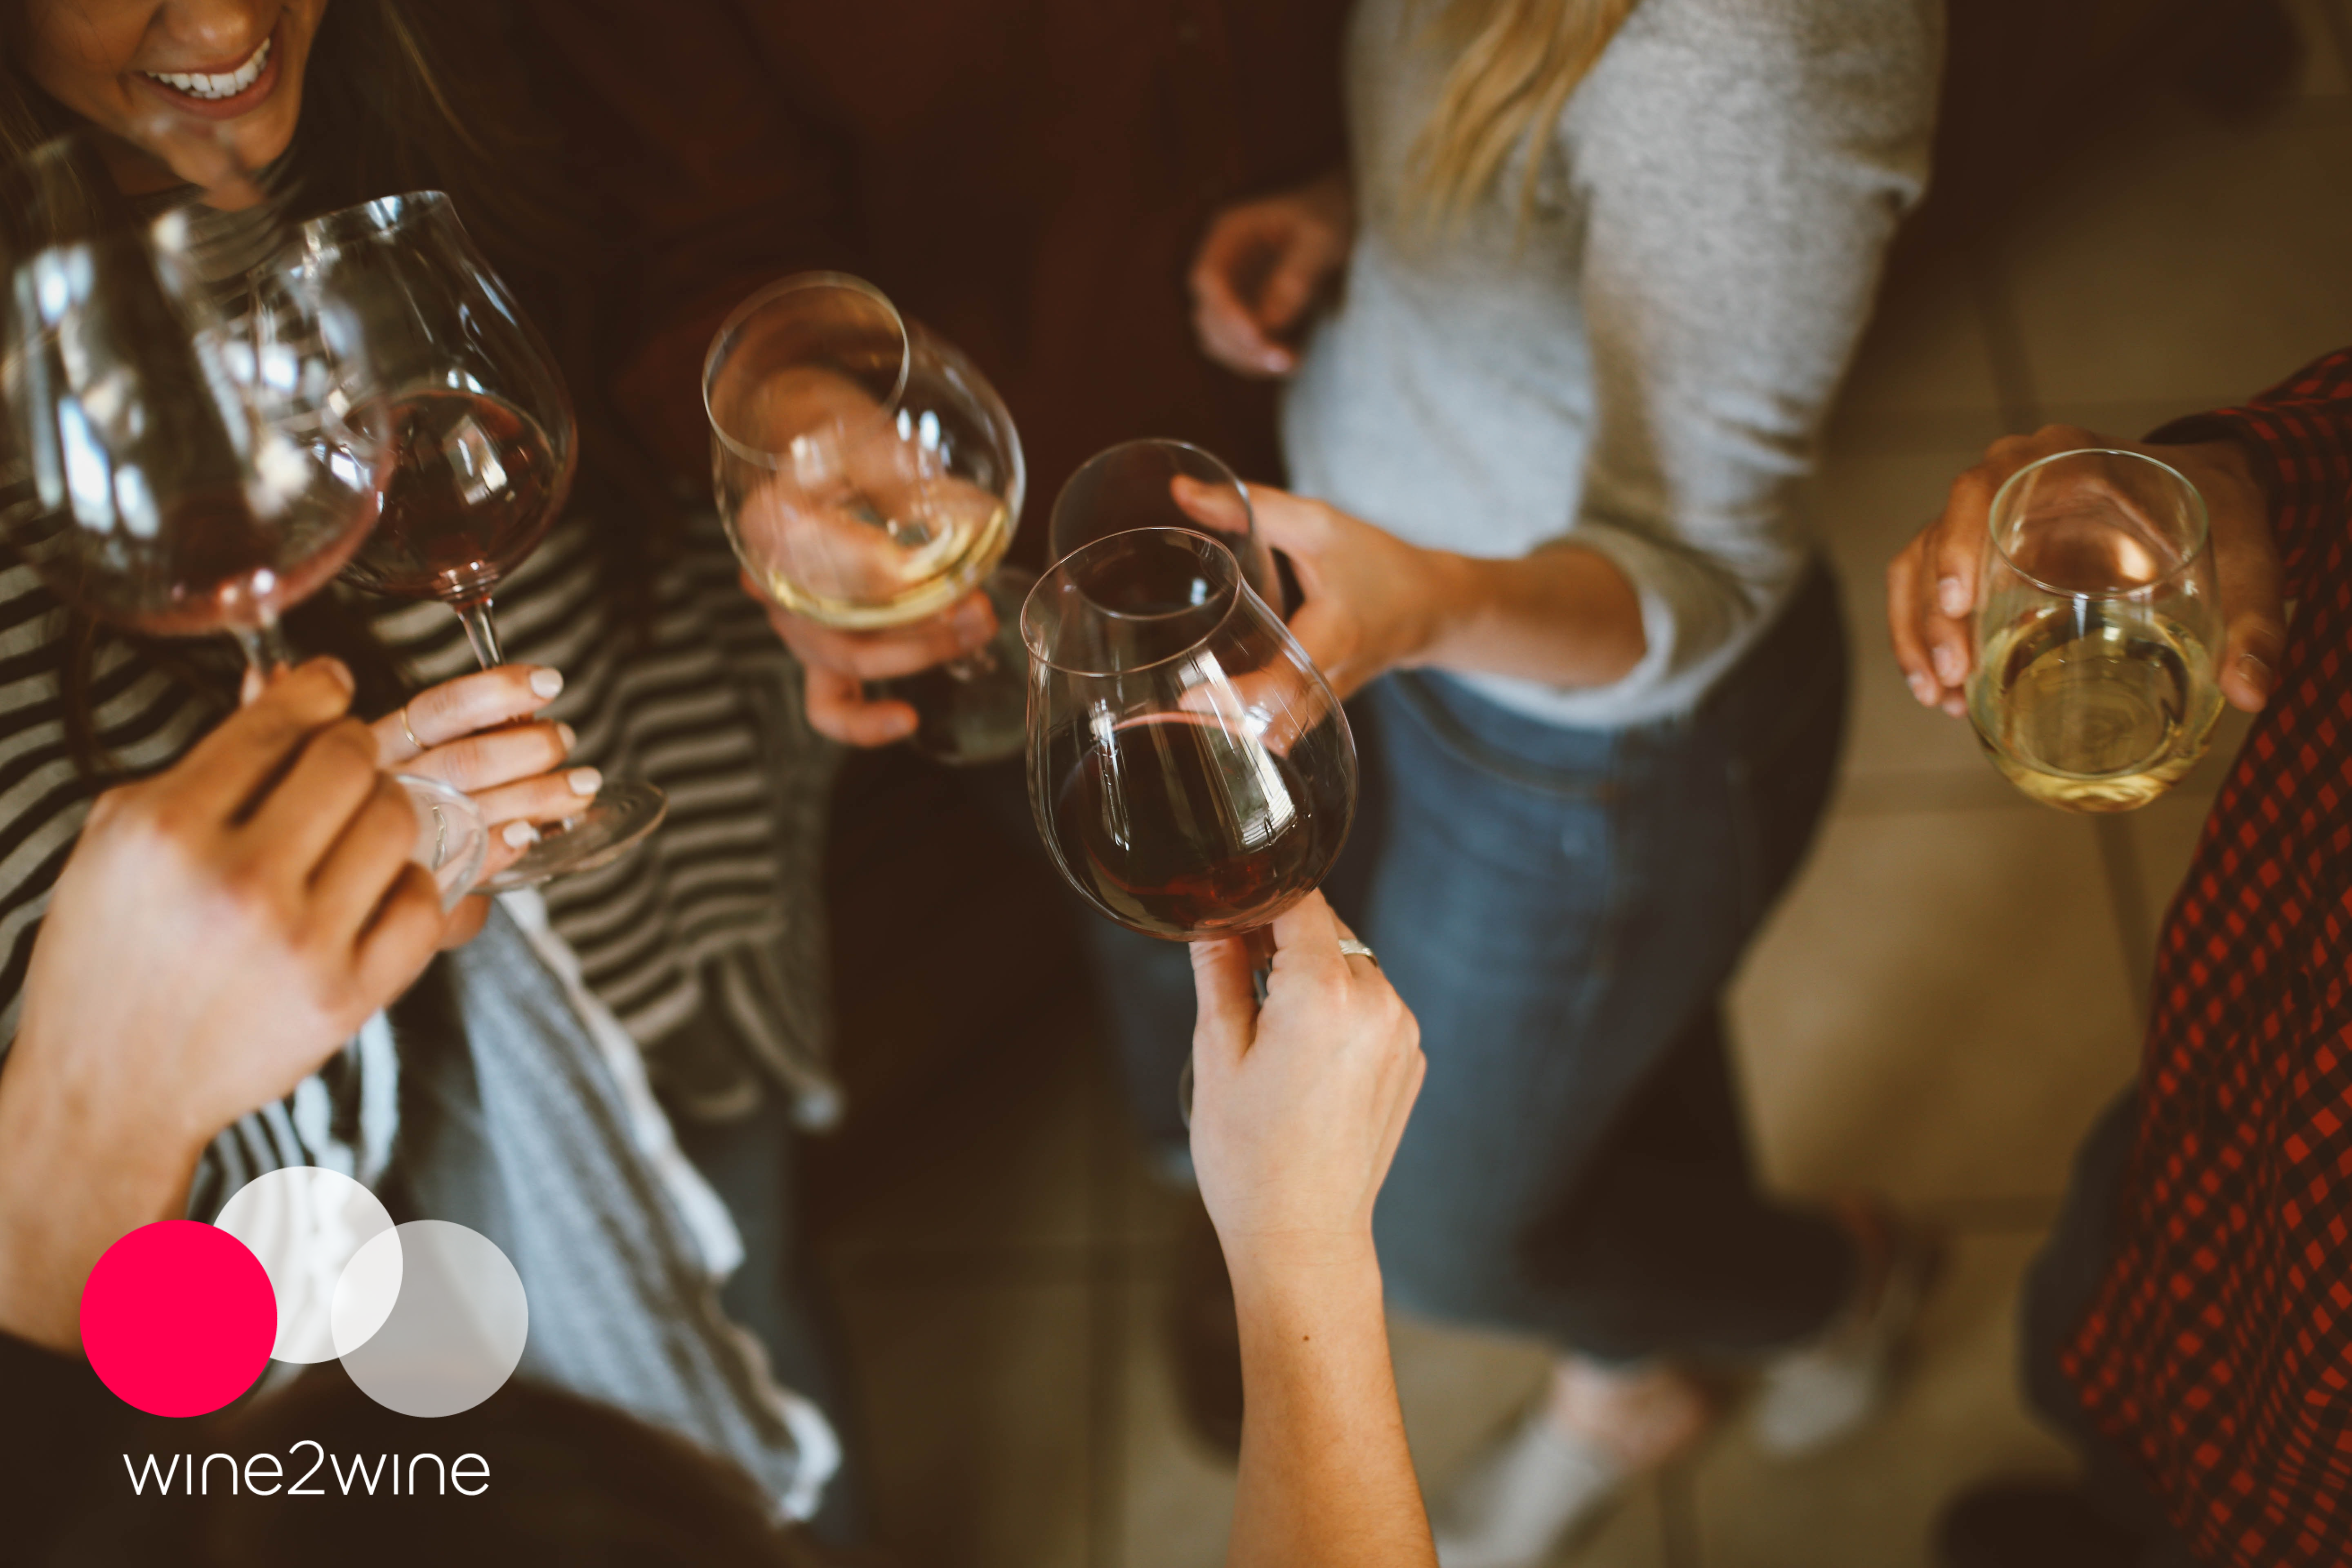 Attracting the younger generation of wine consumers